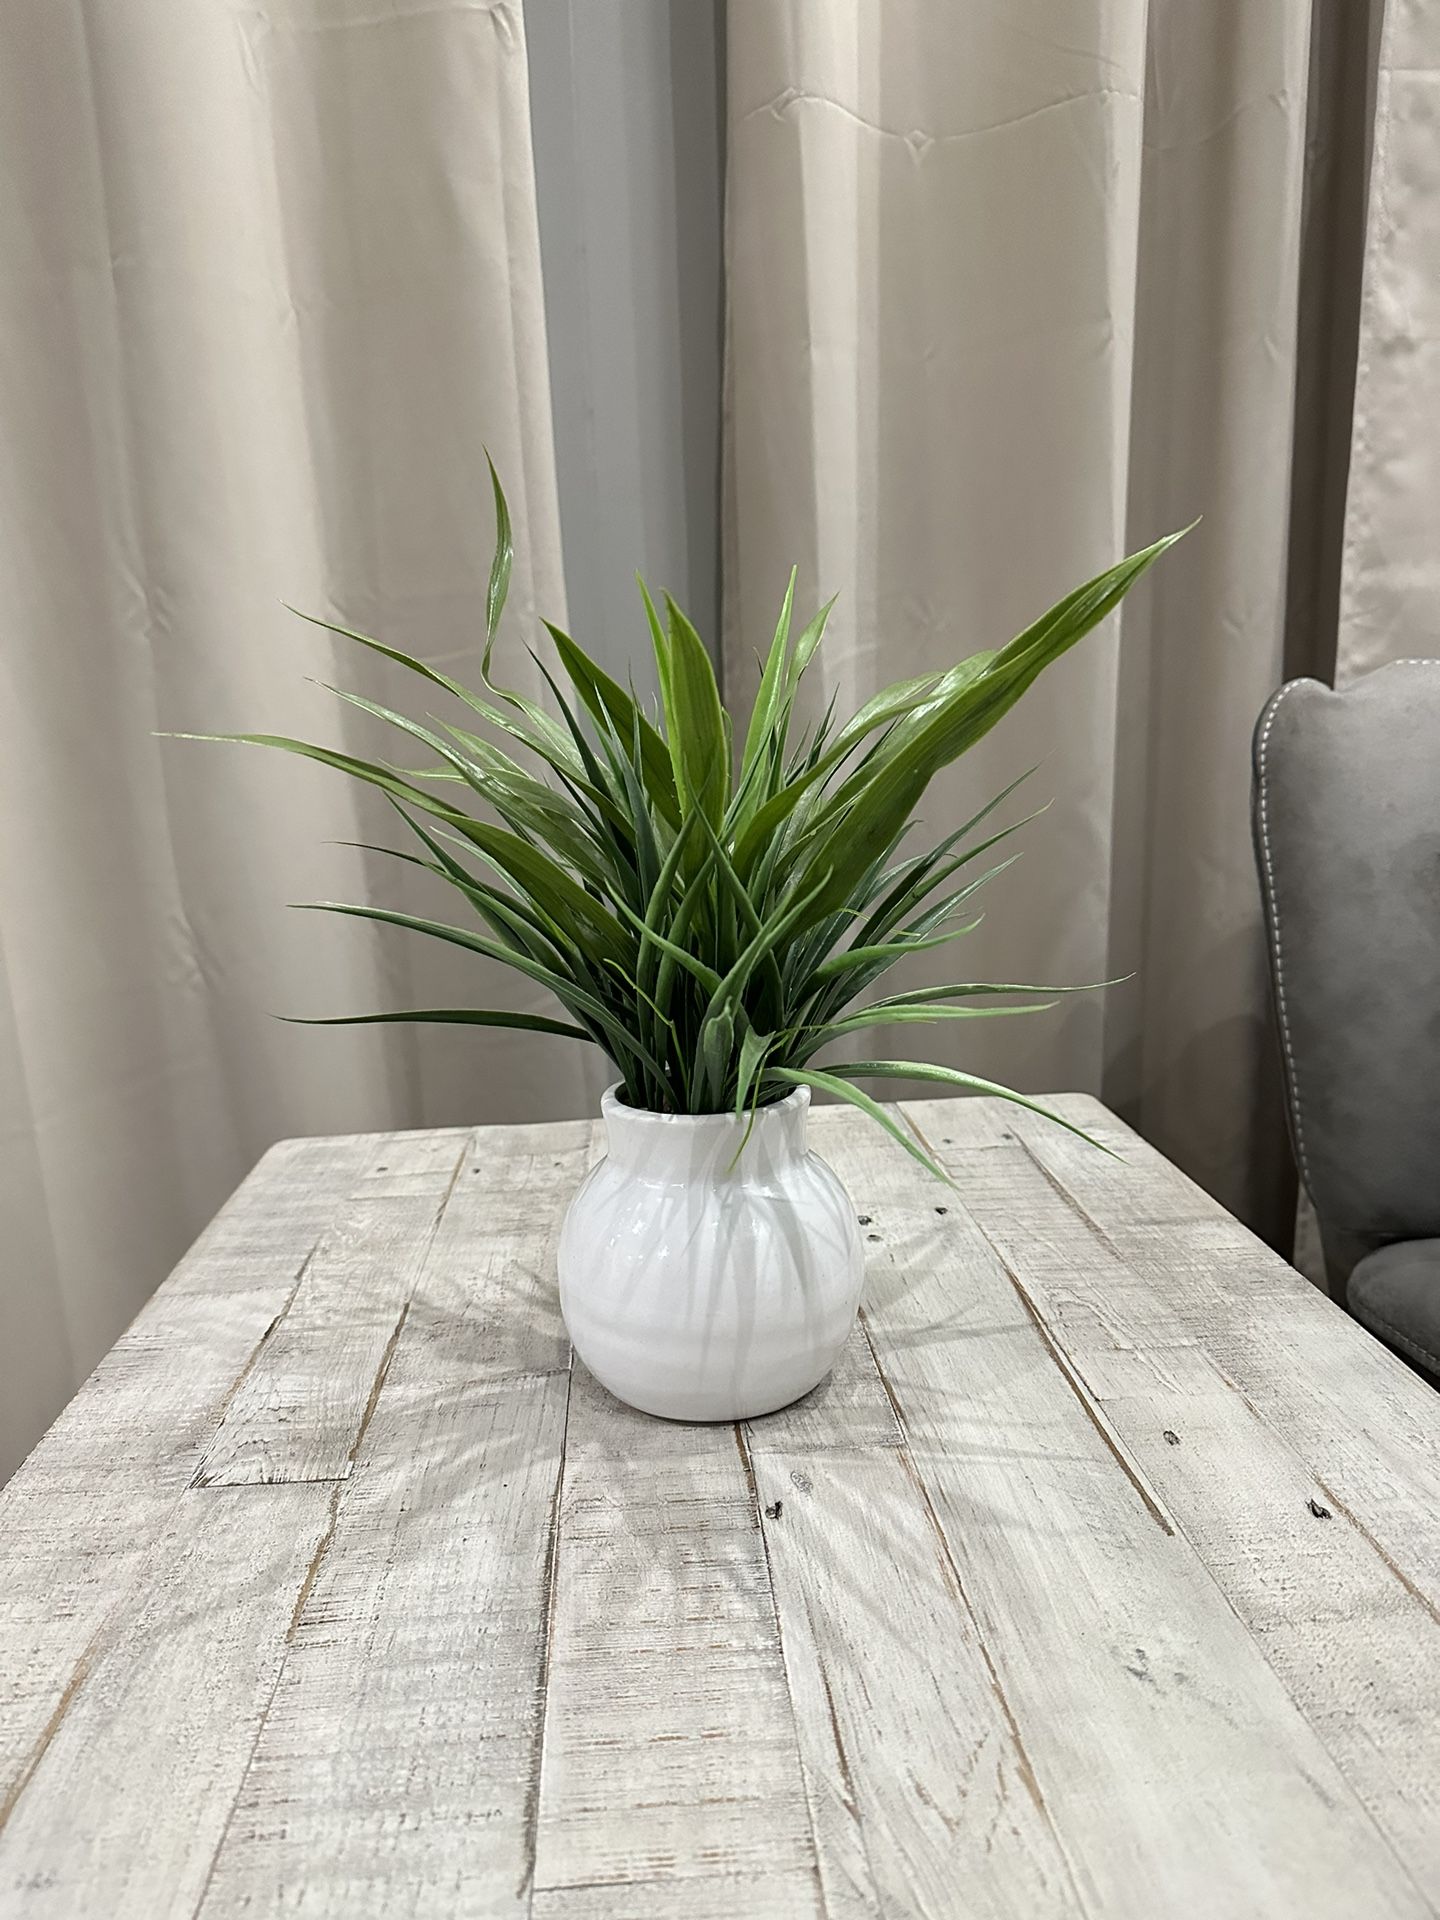 Fake Artificial Grass in Modern White Ceramic Plant Pots. Table Centerpiece. Need gone ASAP.